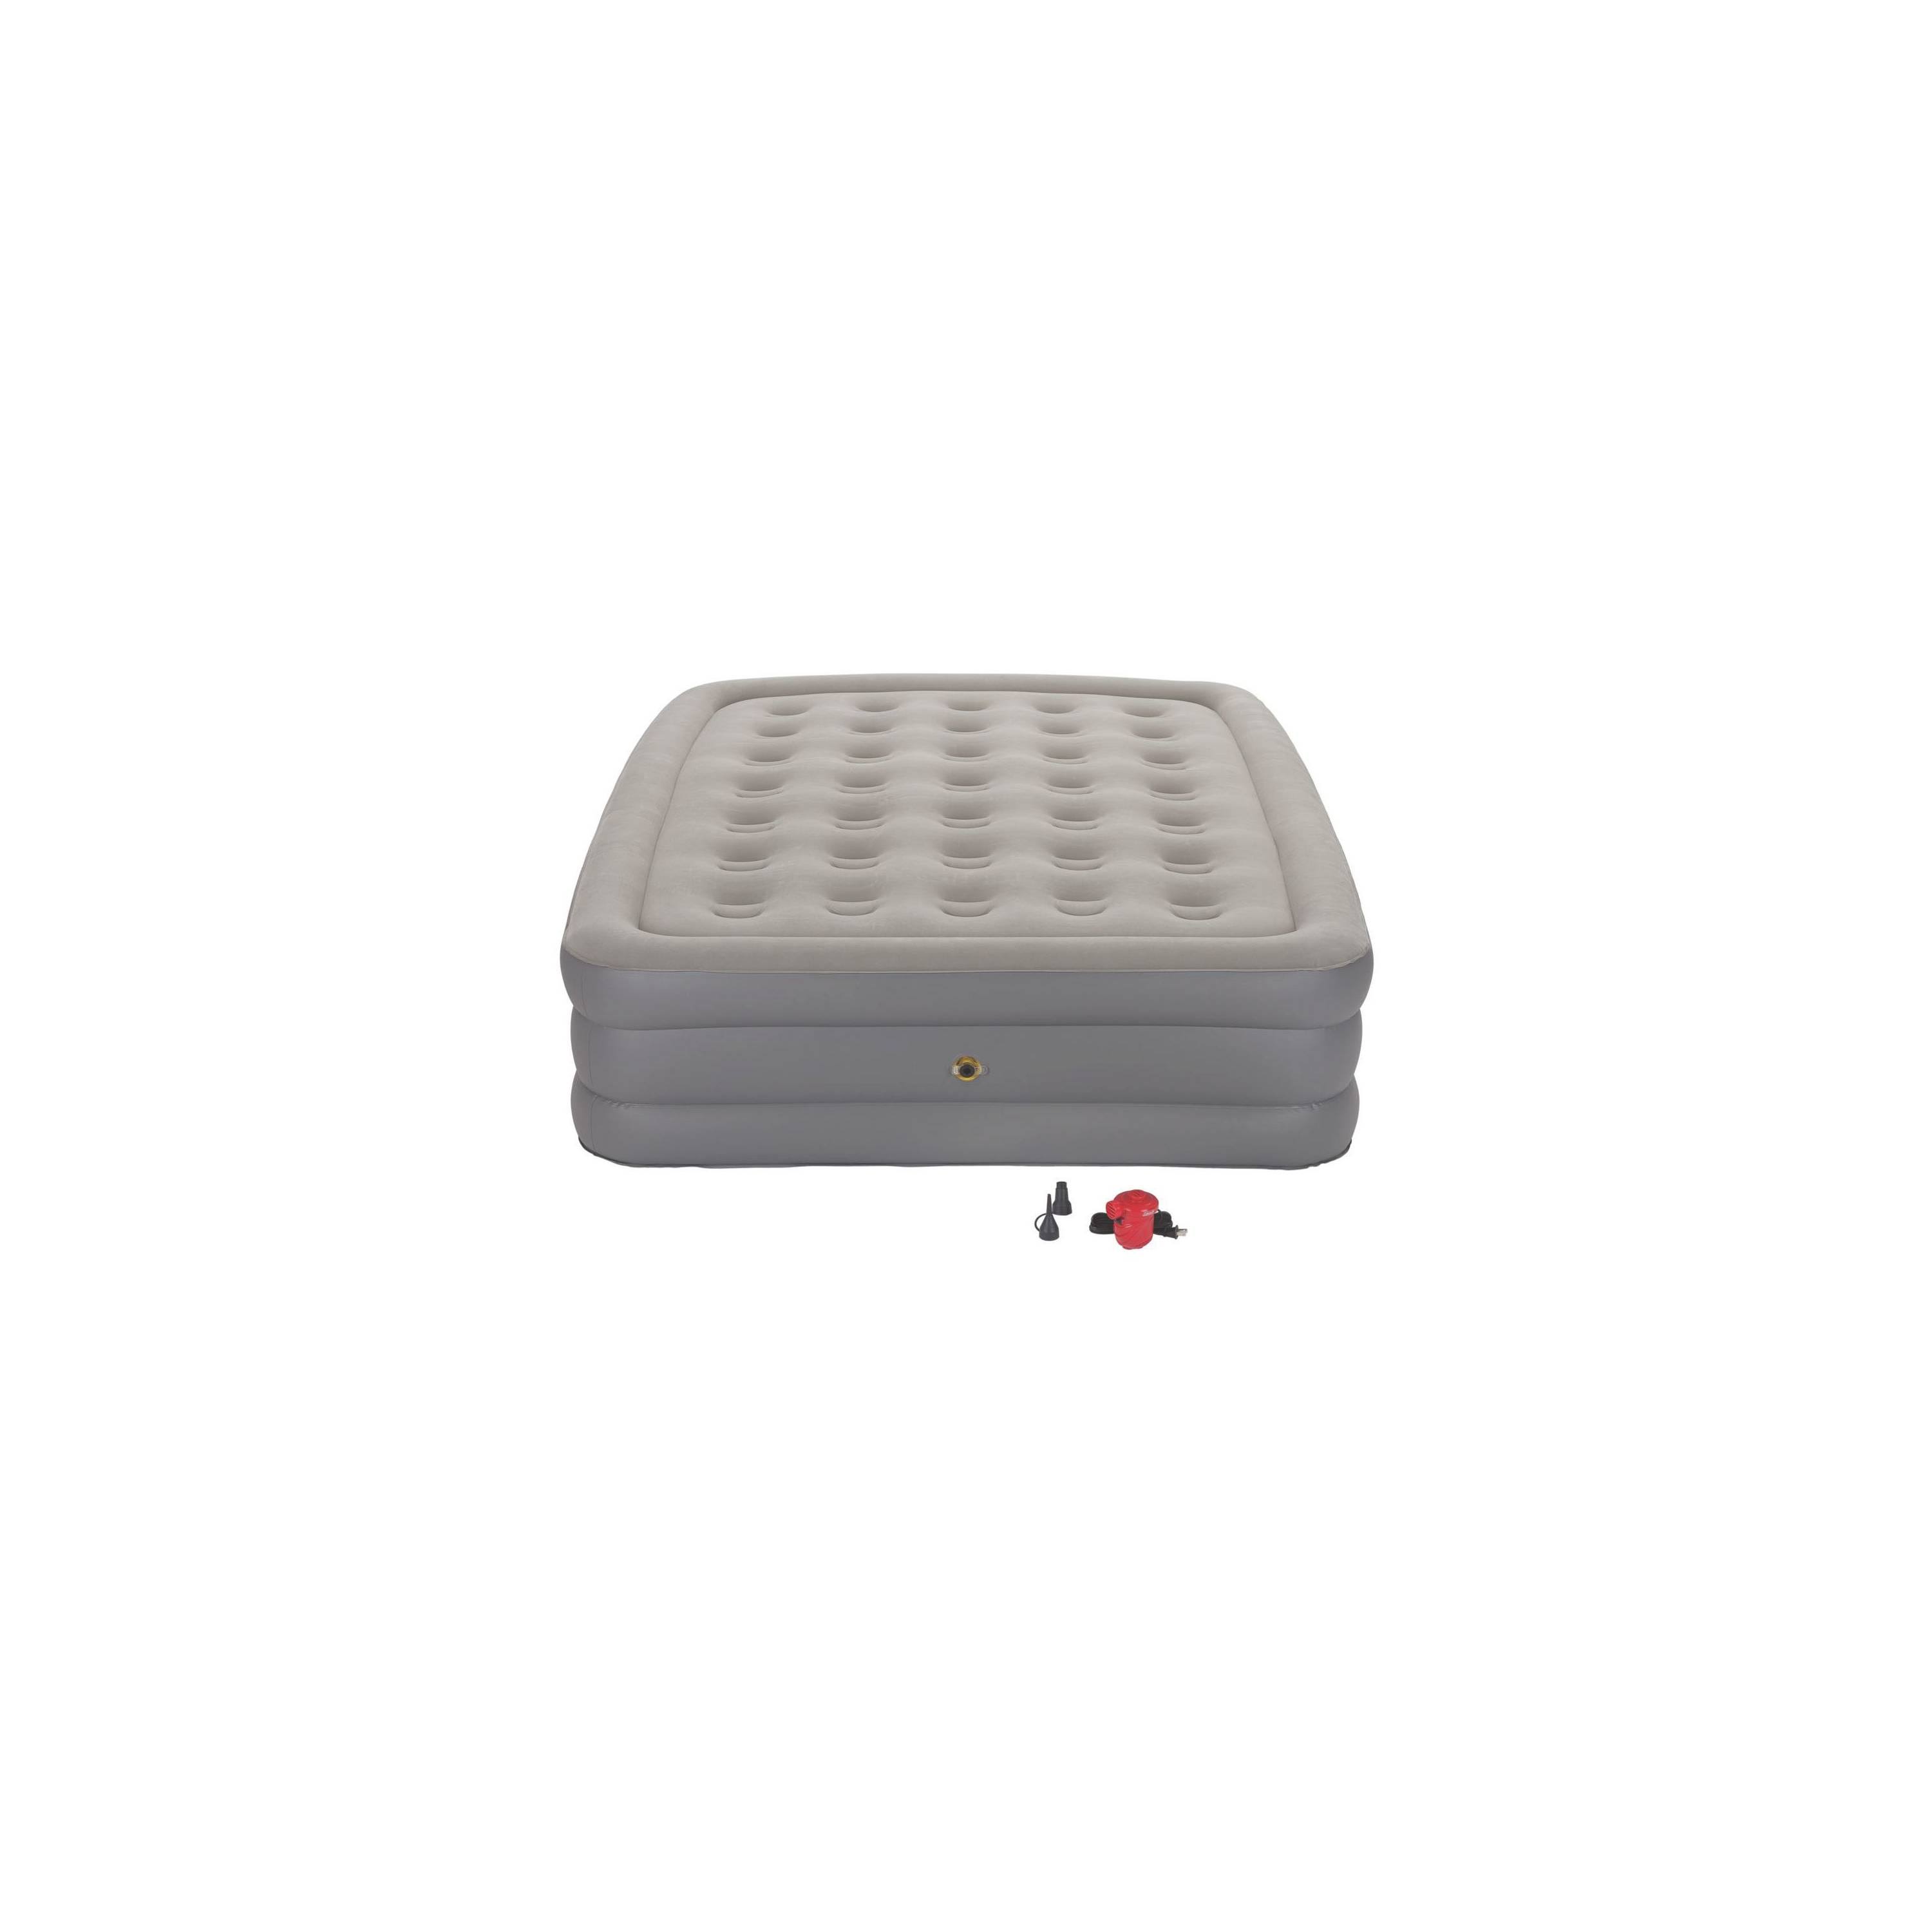 Coleman Guestrest Double High Airbed with External Pump, Queen, Grey